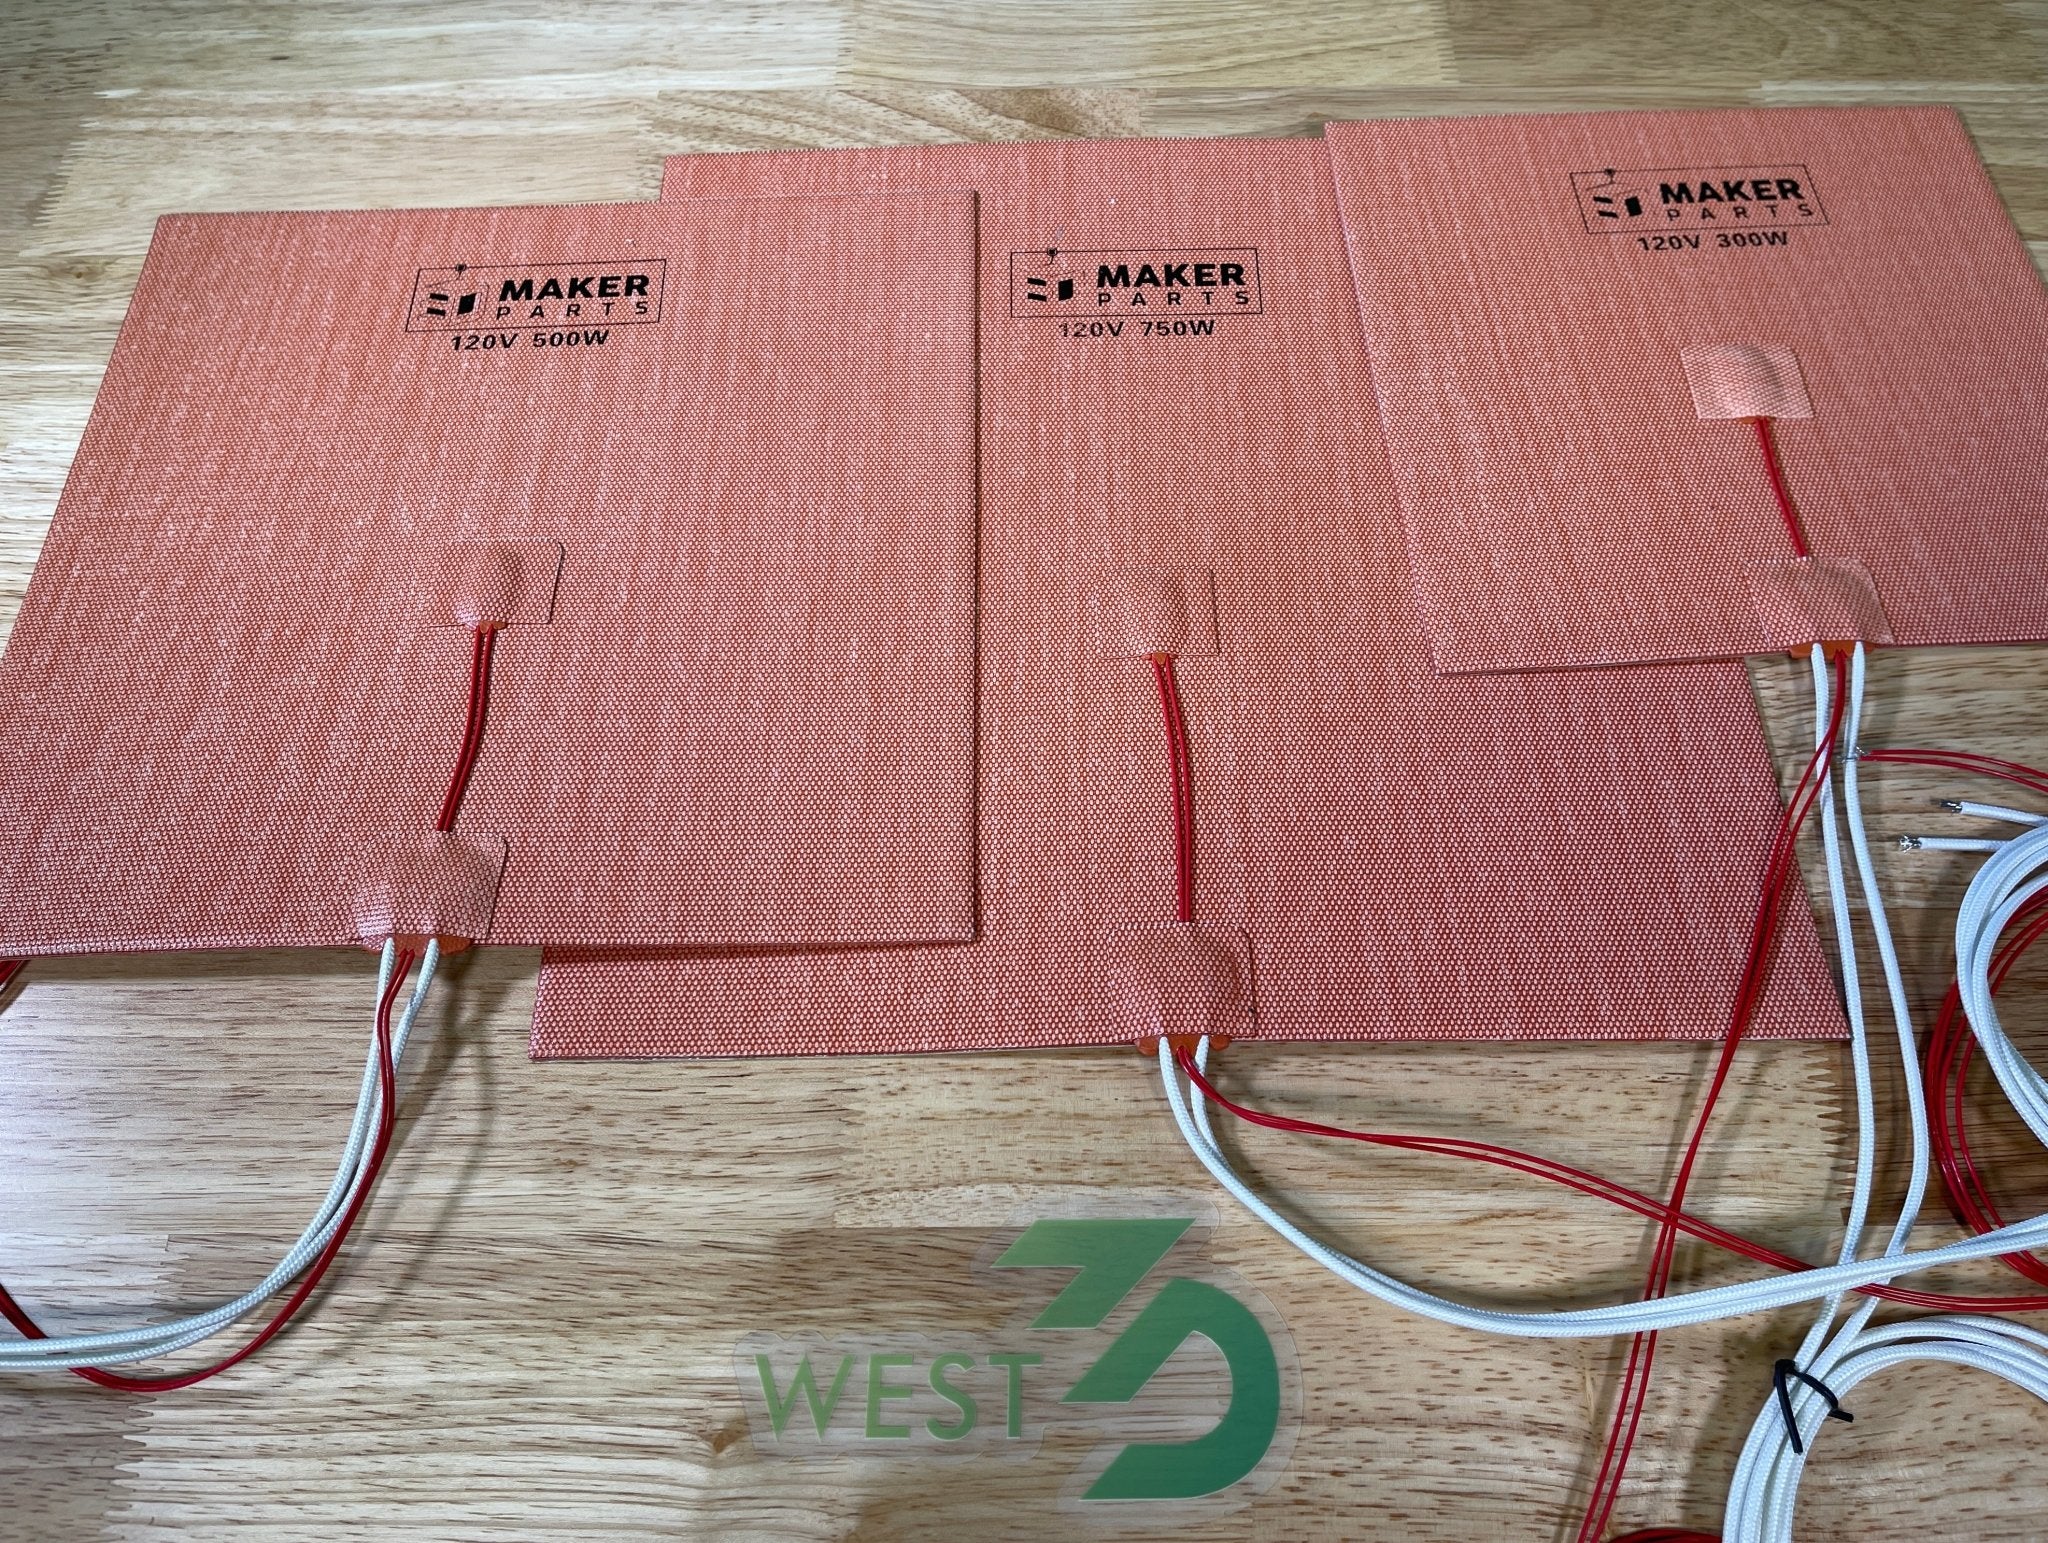 3DMakerParts Silicone Heater / Heating Pad for 3D Printers - West3D Printing - 3DMakerParts